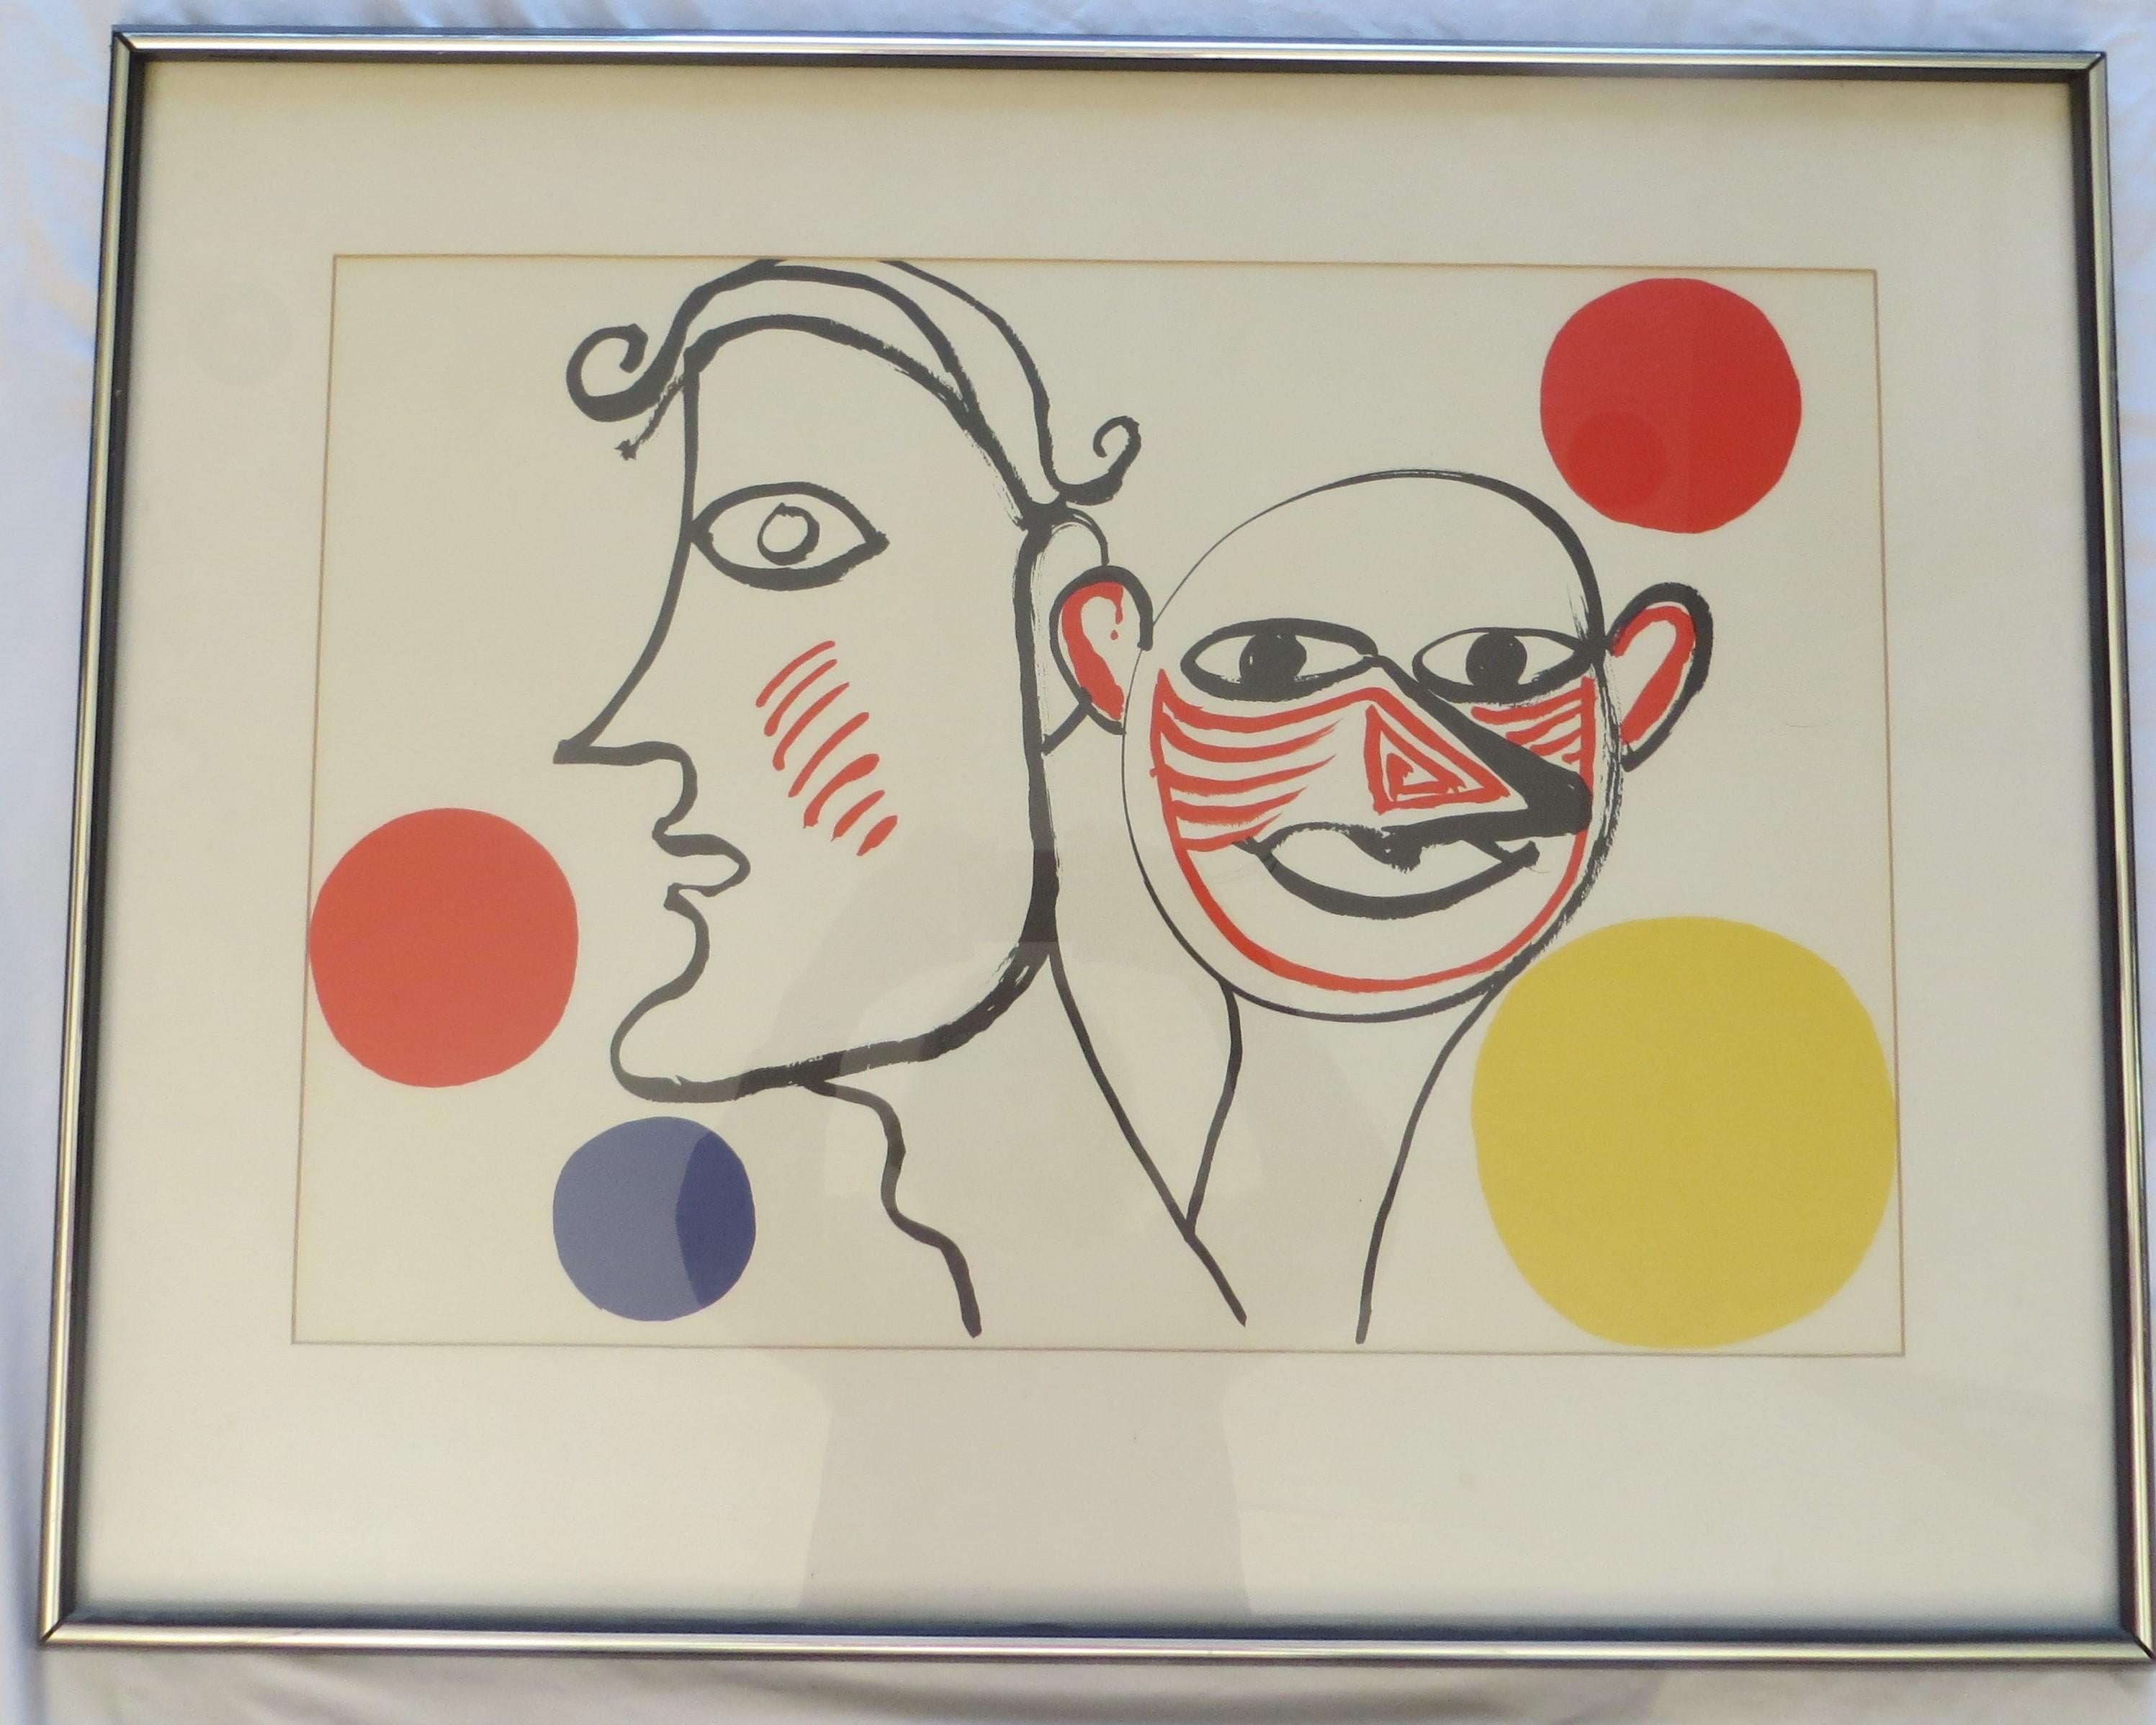 Artist: Alexander Calder
Medium: Lithograph in colors
Title: Derriere le Miroir #221
Portfolio: Derriere le Miroir #221
Year: 1975
Edition: Unnumbered
Image Size: 15" x 22"
Signed: Unsigned
Certificate on the back 